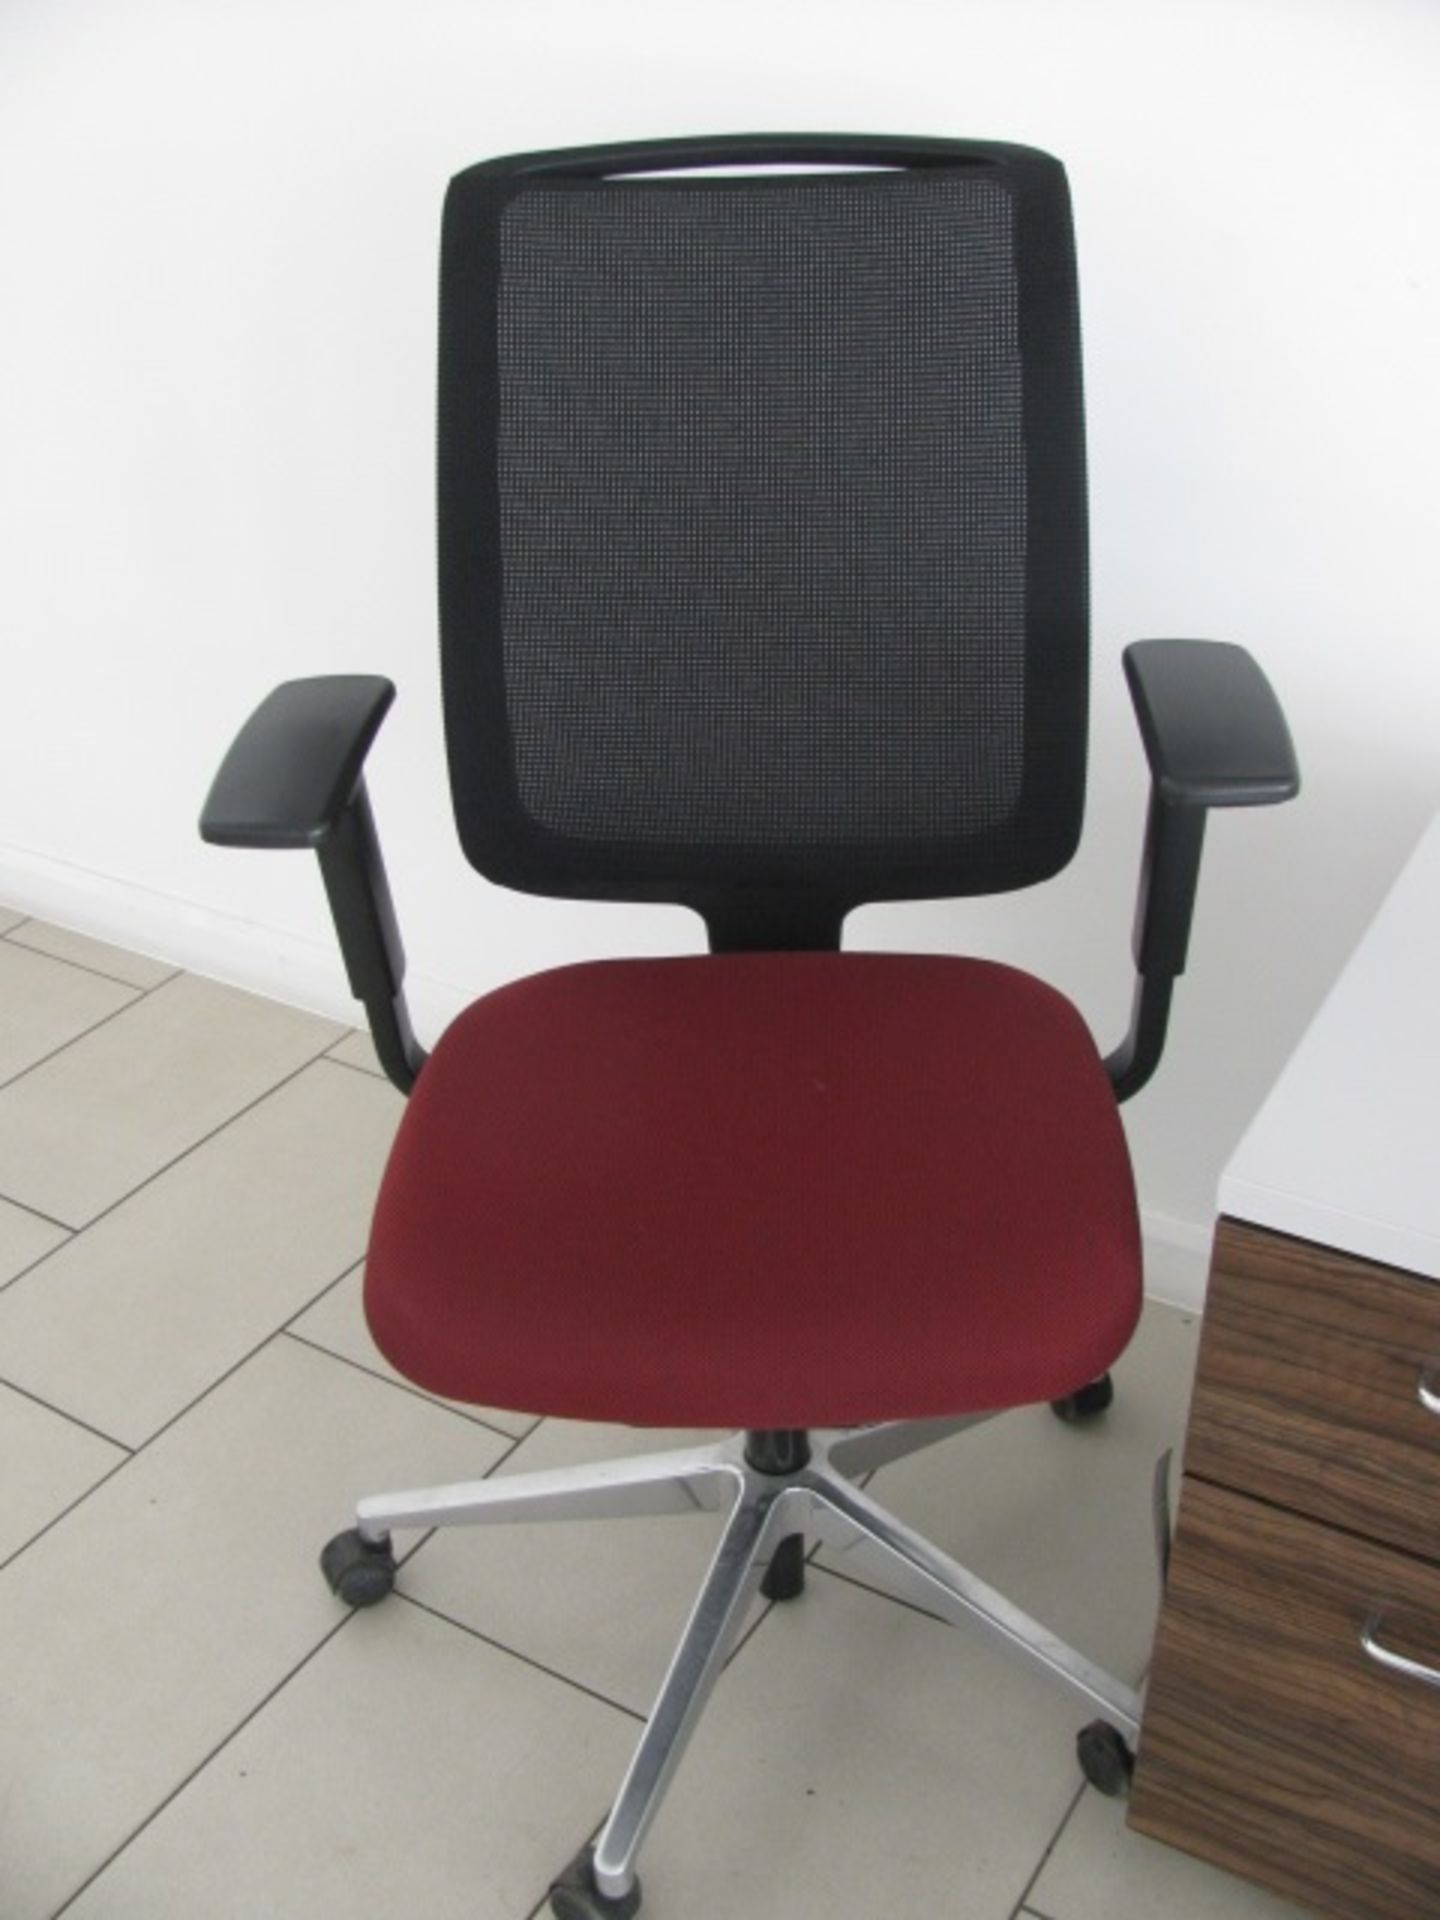 Assorted Office Furniture - Image 4 of 5